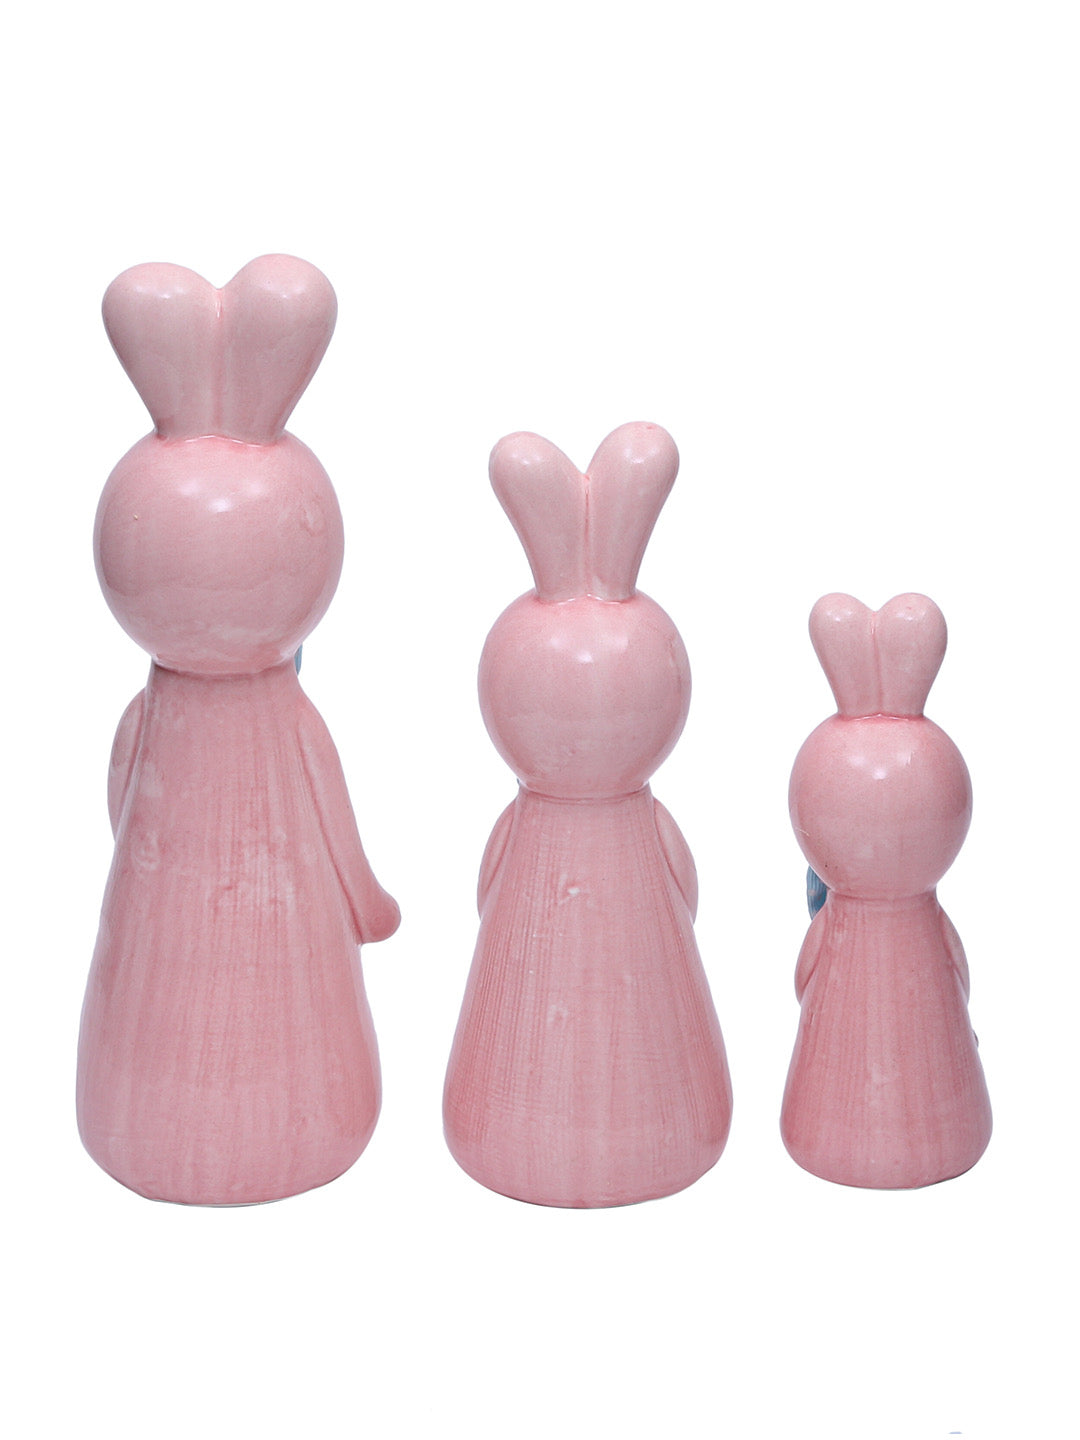 Pretty and Delightful Pink Ceramic Rabbit Family - Default Title (SHOW19563)